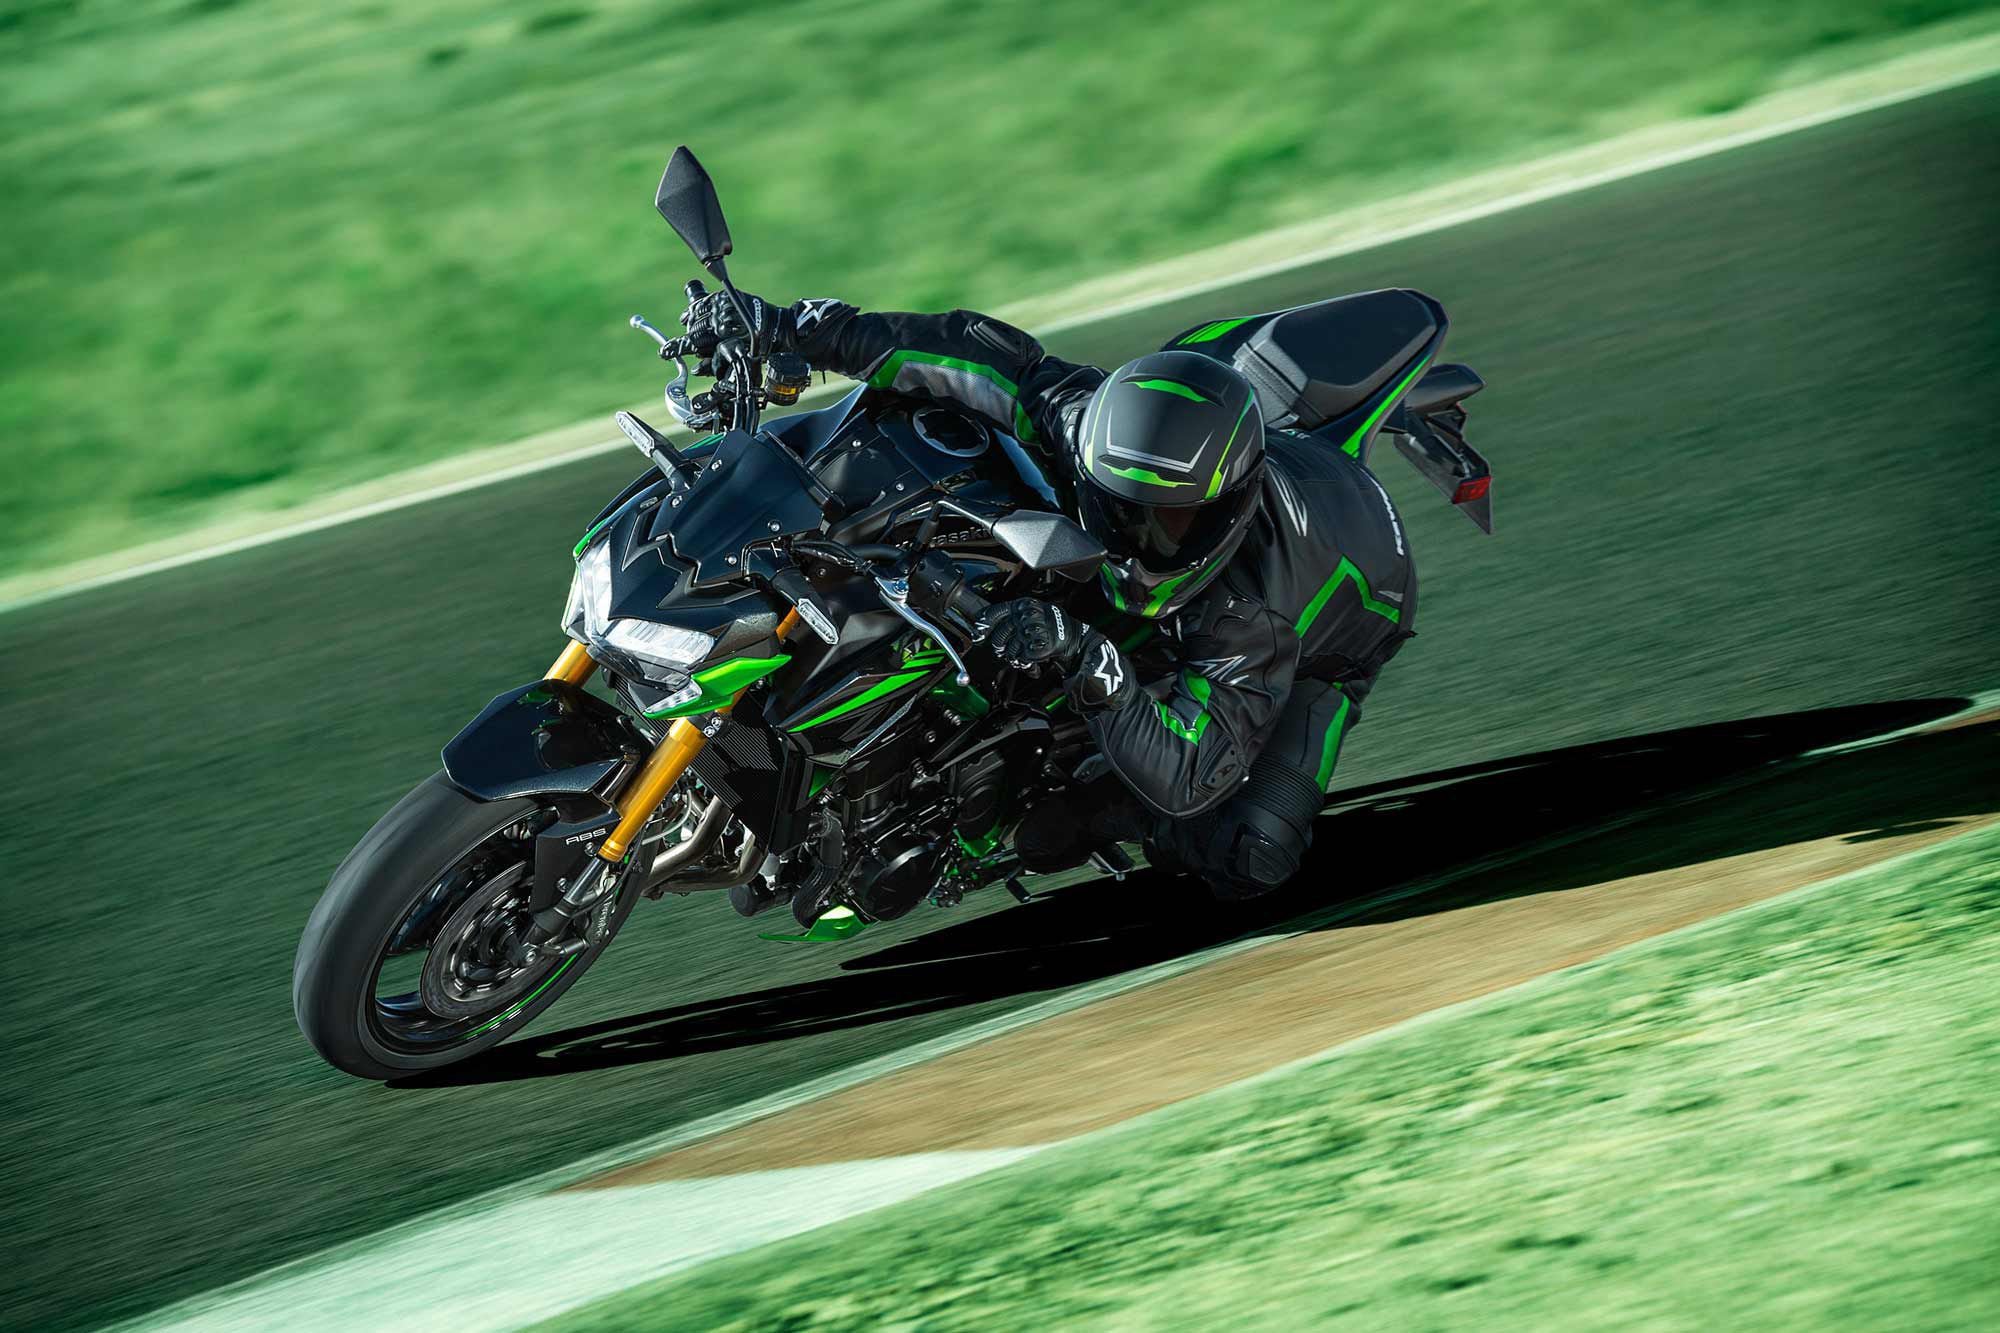 “<em>Sugomi</em>” styling is what Kawasaki says informs the sharper bodywork, as with the shaped engine shrouds and headlight cowl.